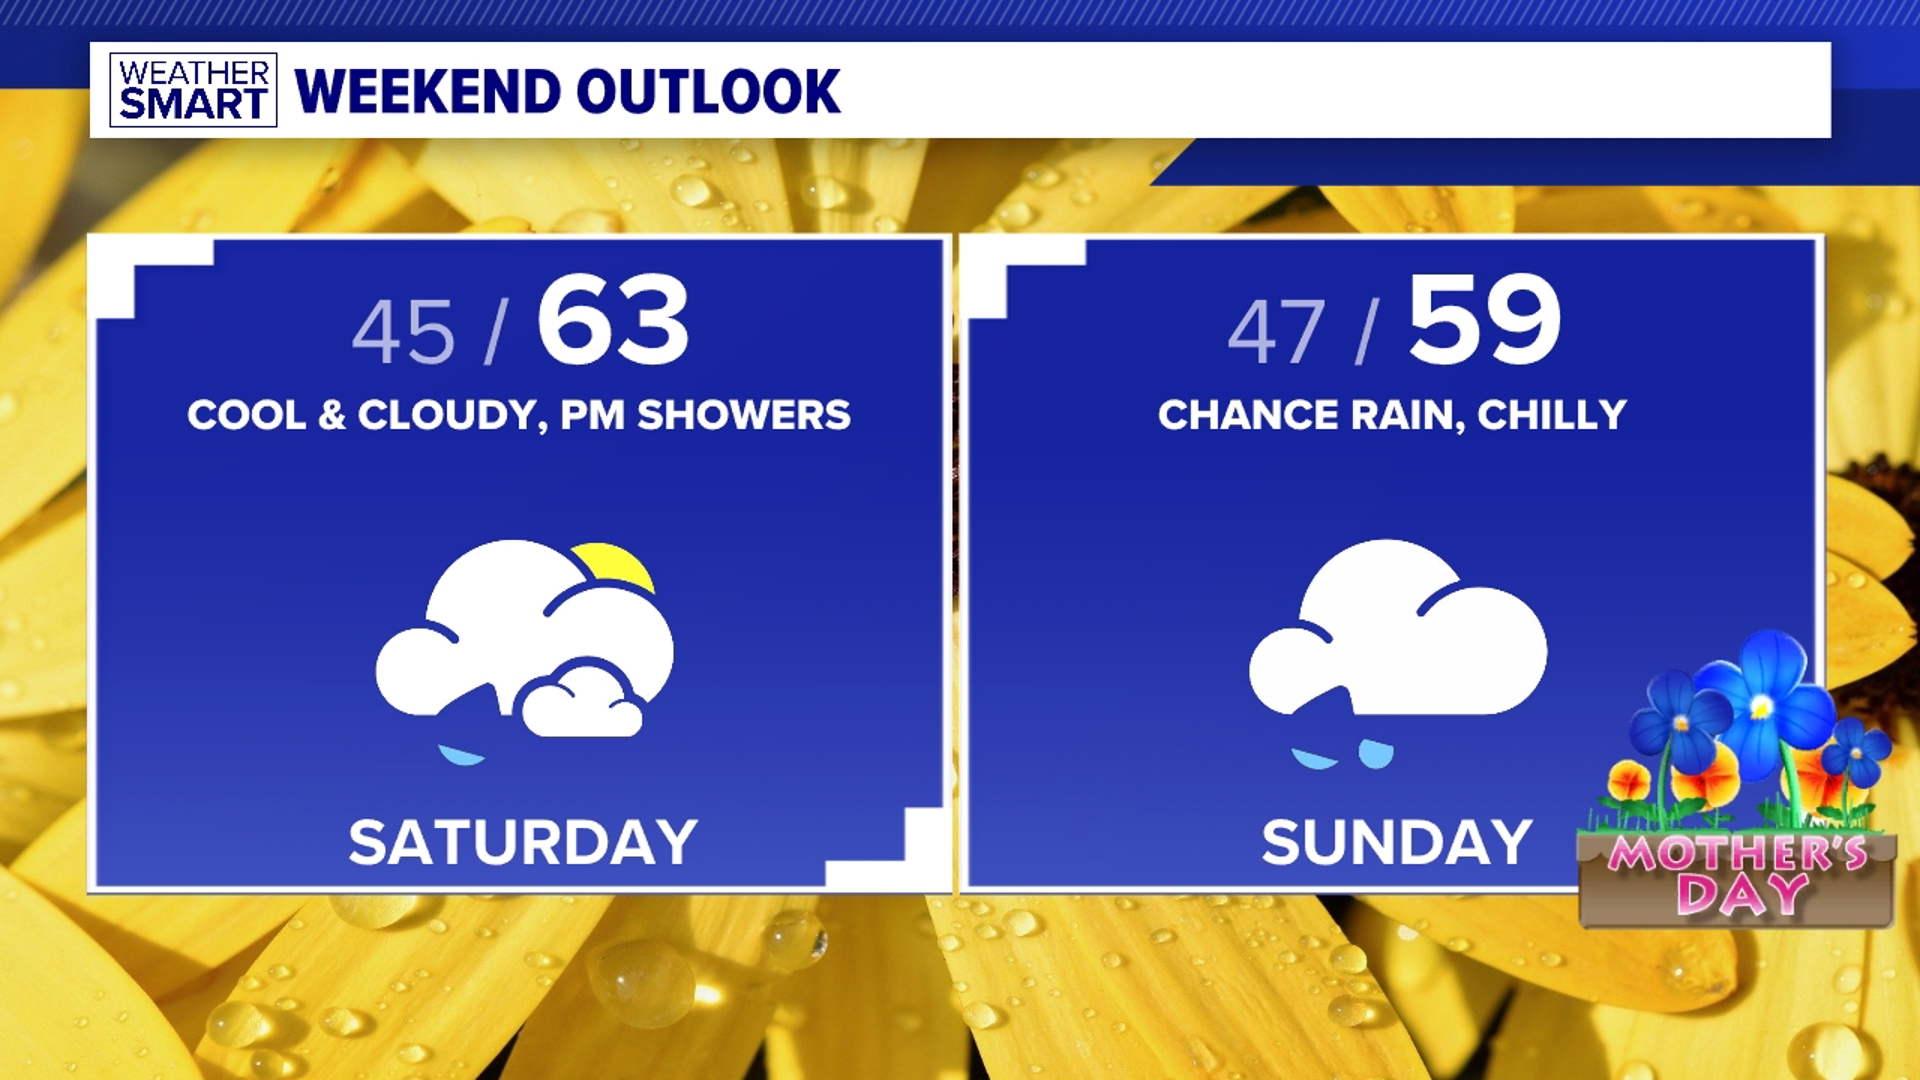 Mother's Day Weekend features below average highs, and showers at times. There will be periods of dry weather to enjoy but keep the umbrella handy!